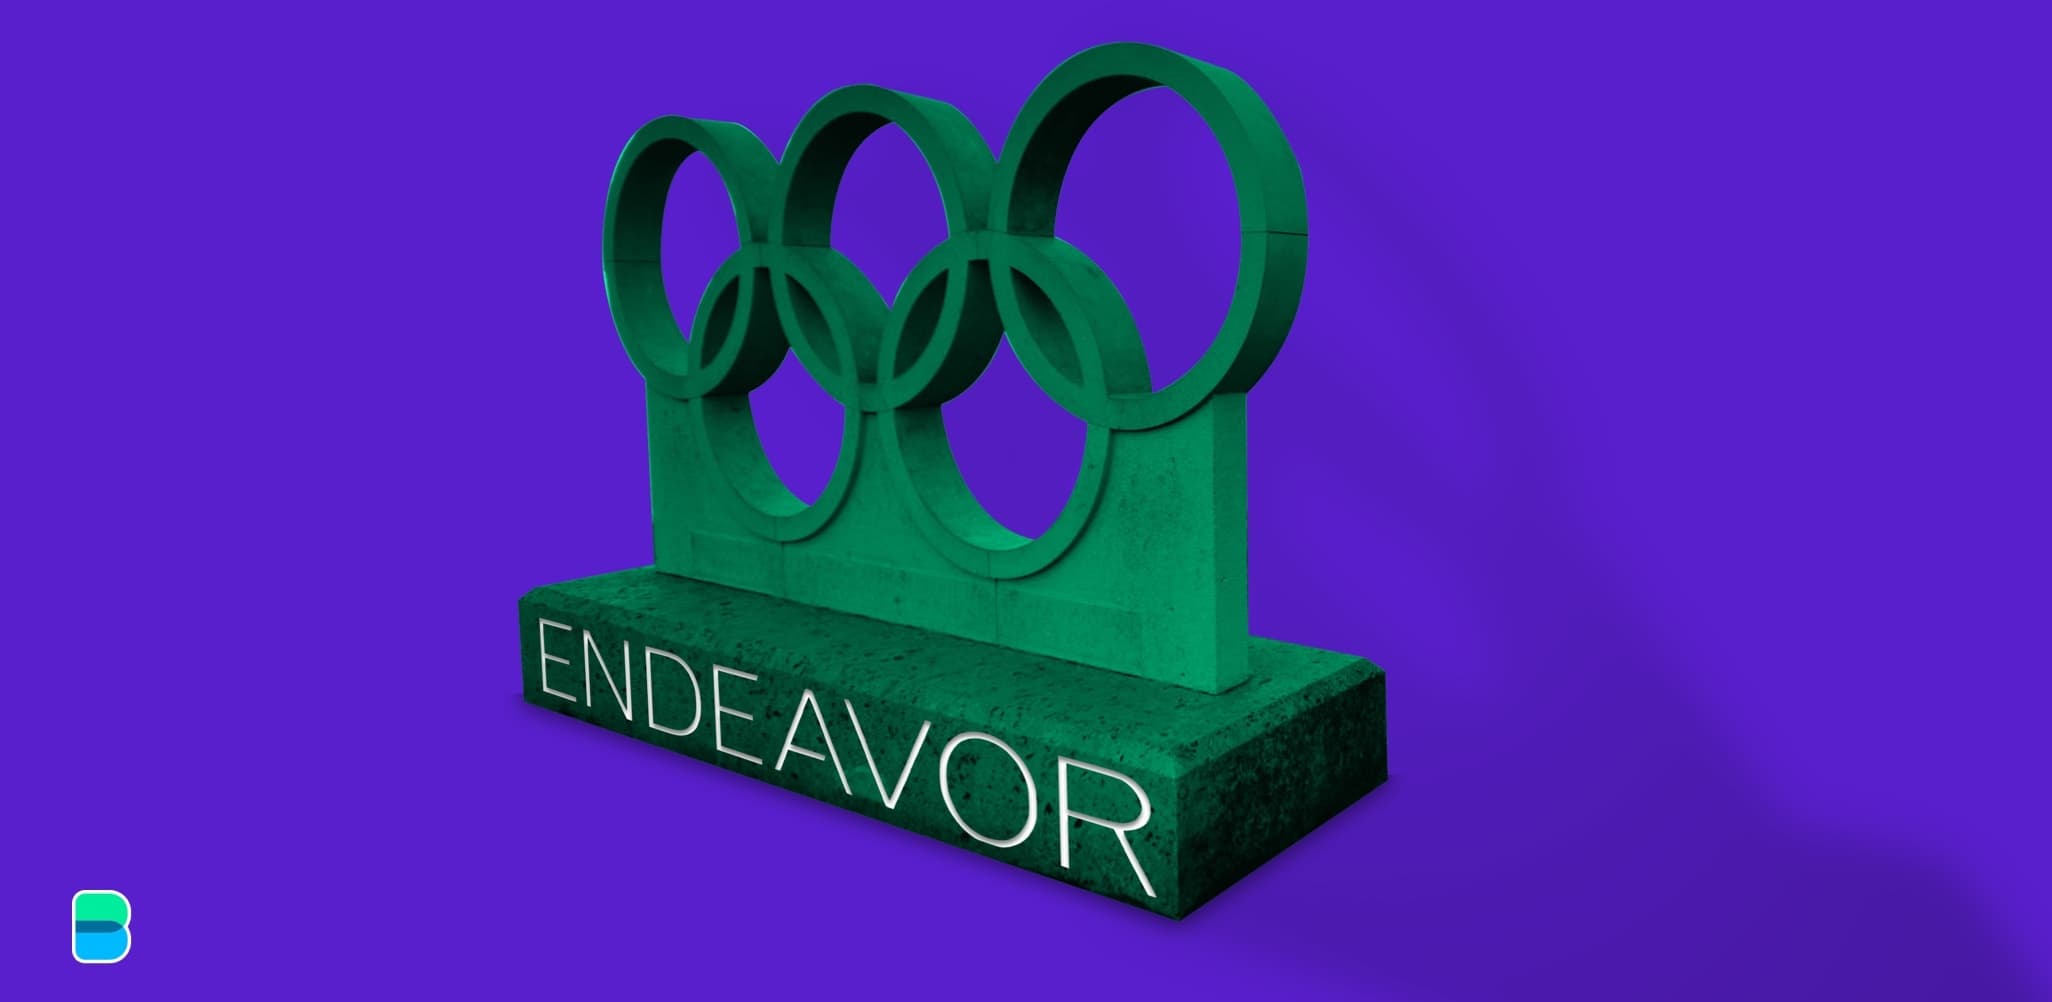 Endeavor hits the podium at the Olympics